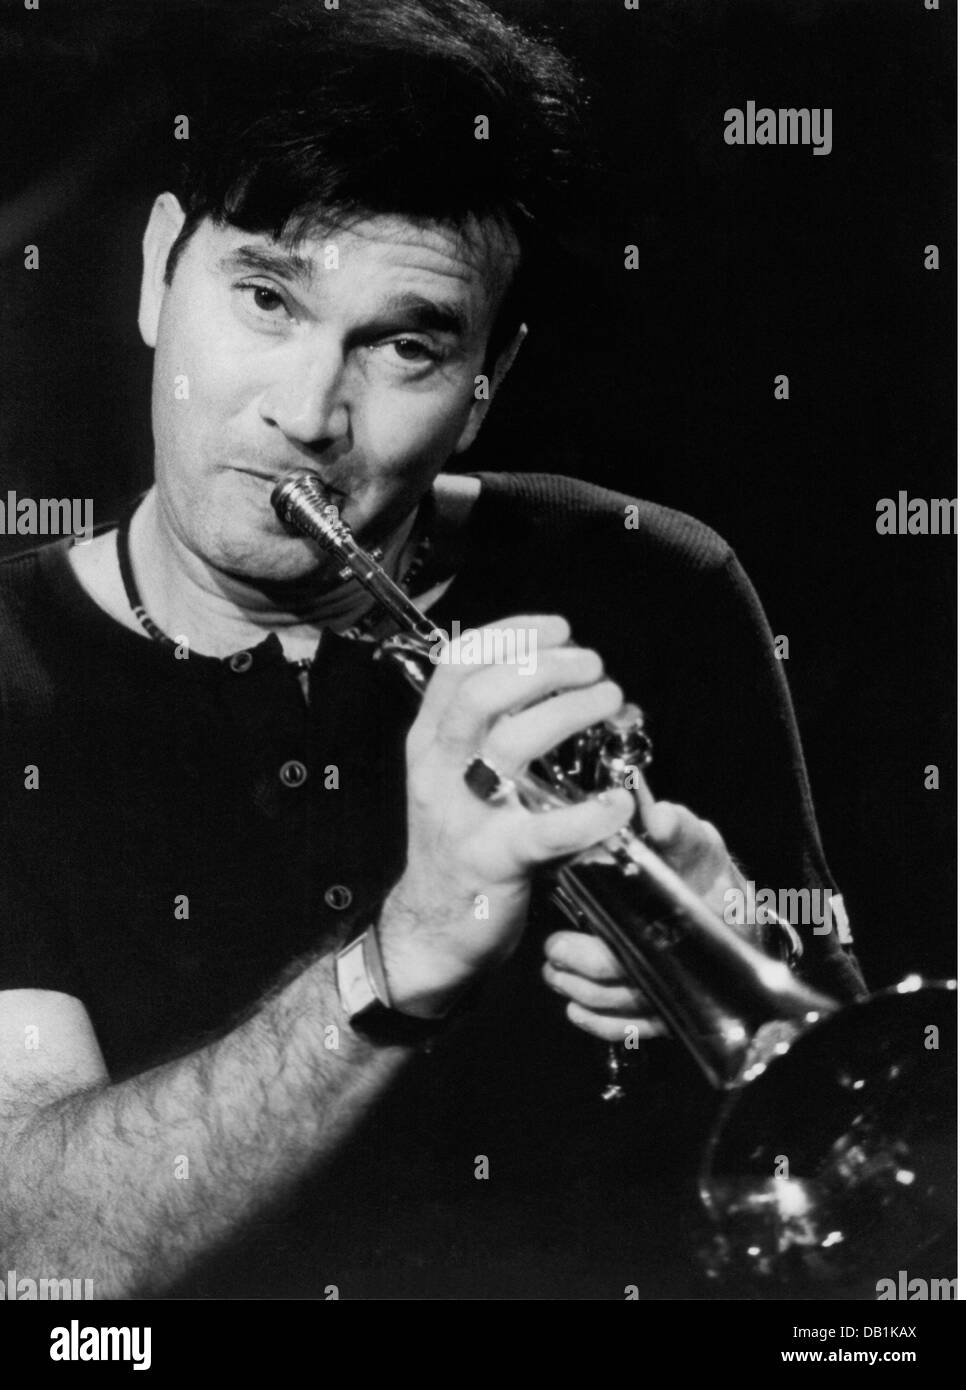 Braun, Rick, * 6.7.1955, American musician (jazz), trumpeter, half length, during stage performance, Montreux, 2000, Stock Photo